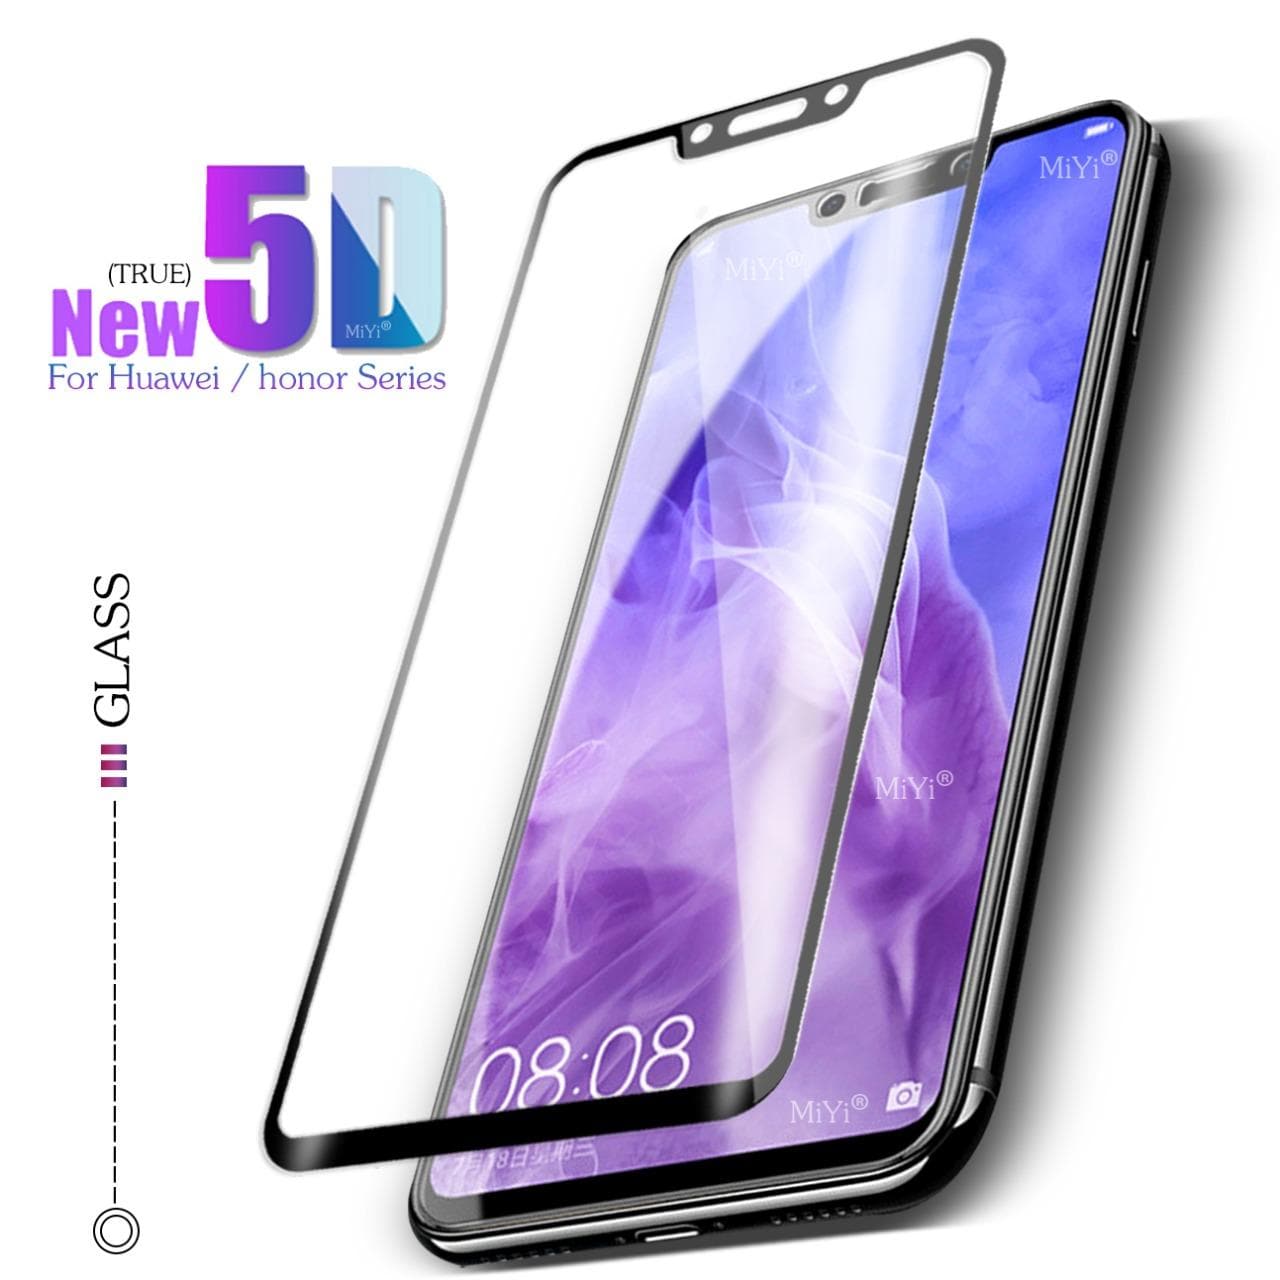 Huawei Branded 5D Full HD Tempered Glass